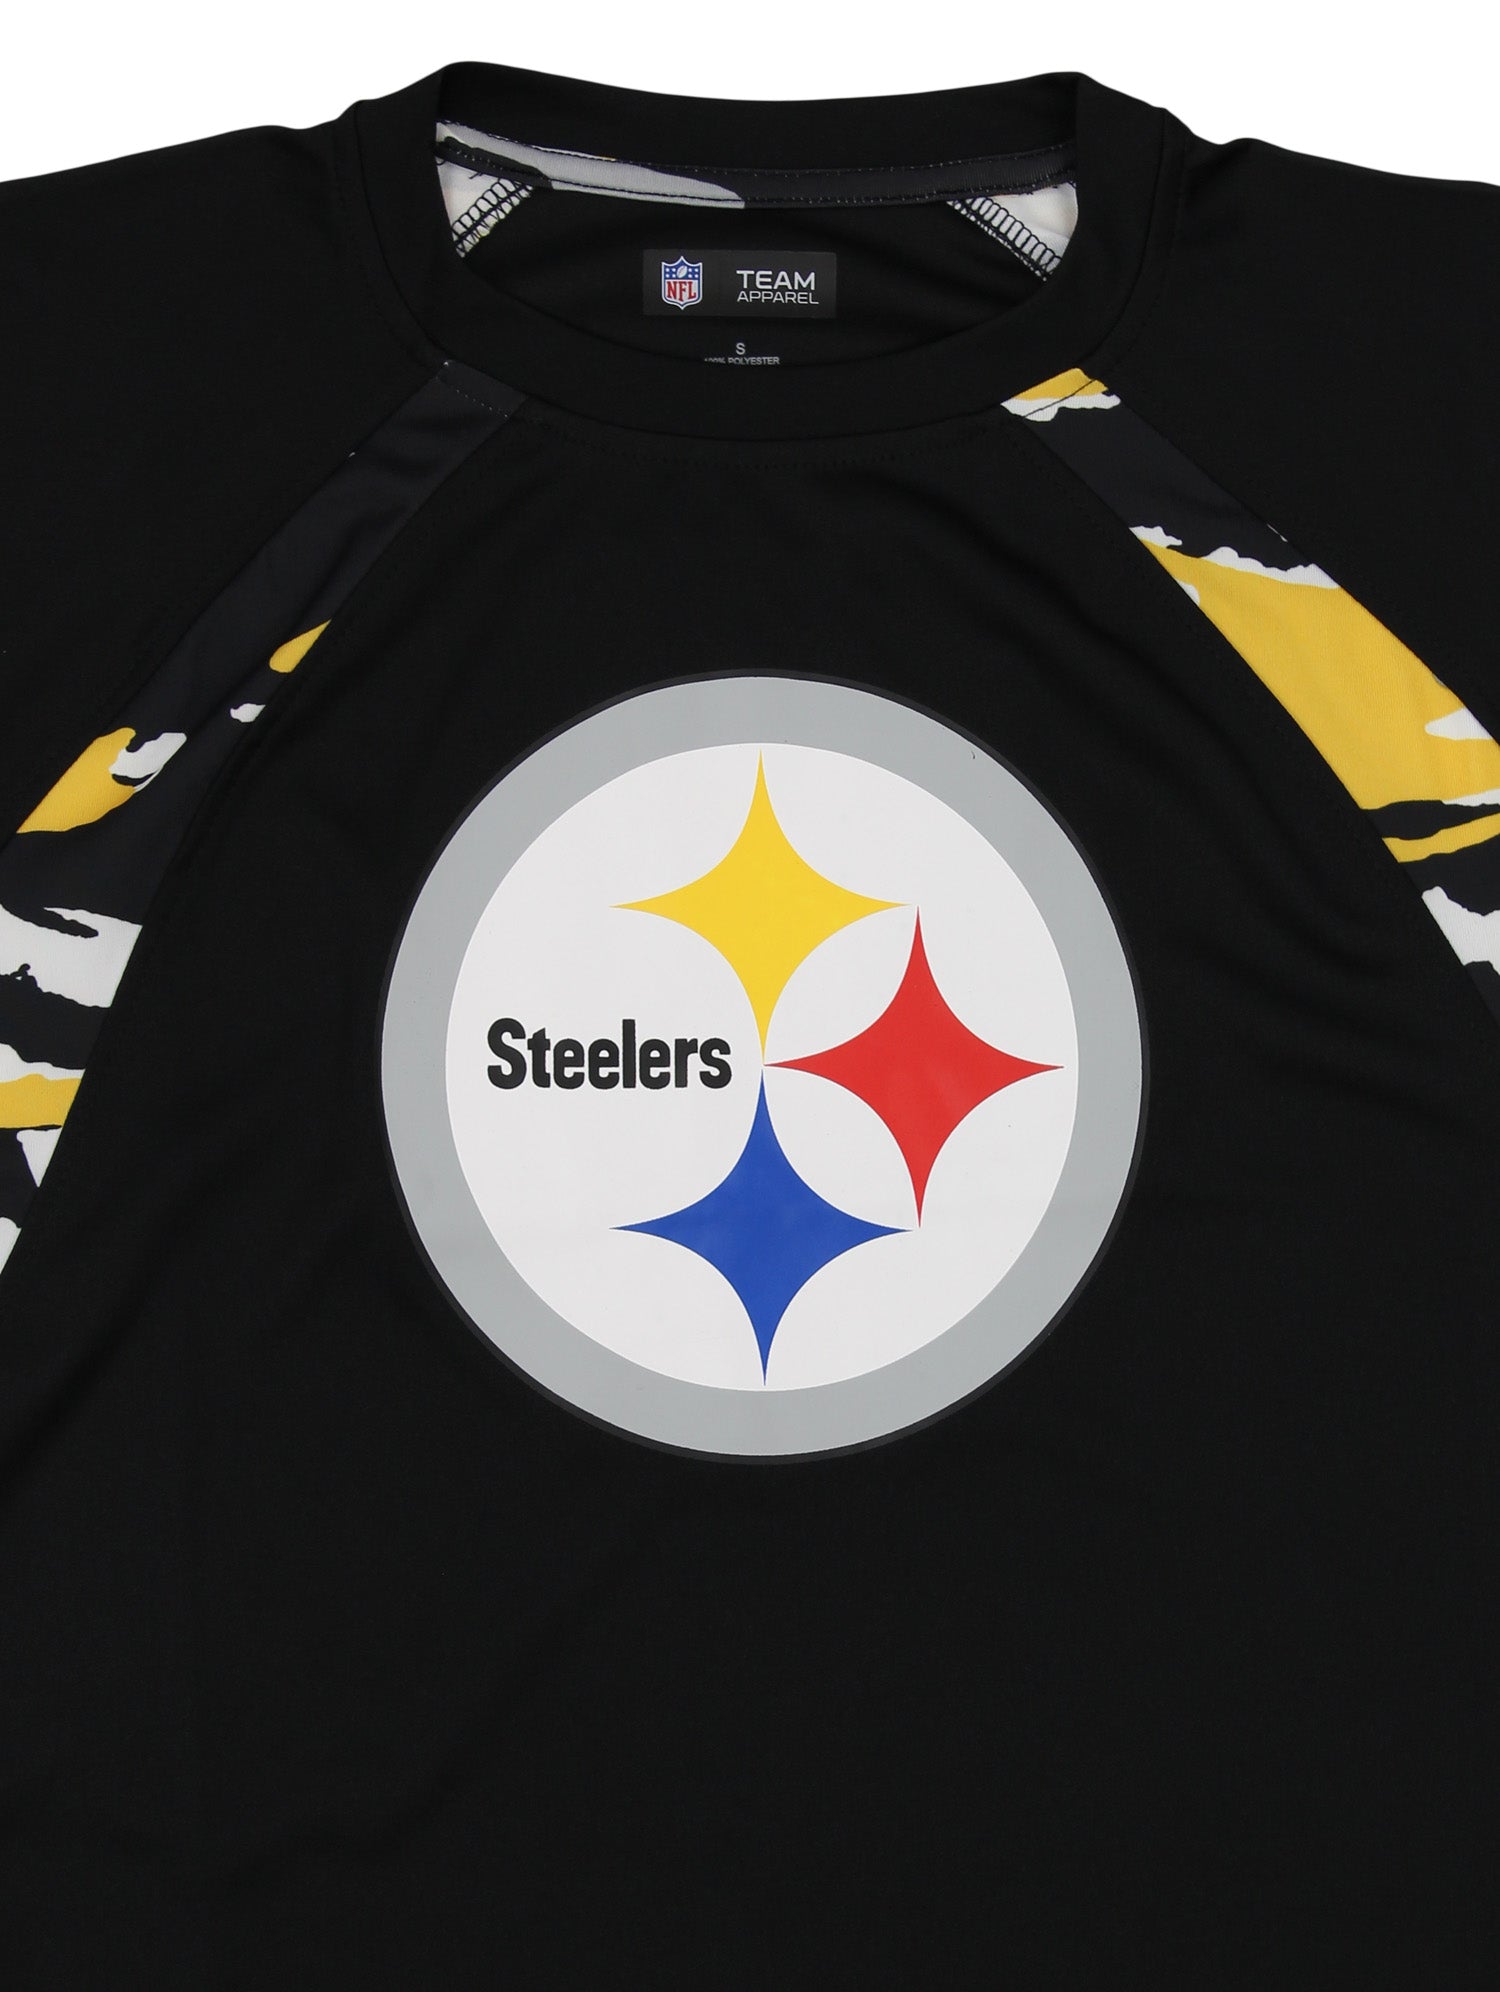 Steelers Zubaz - Today, we strive to advance our unique brand of ...